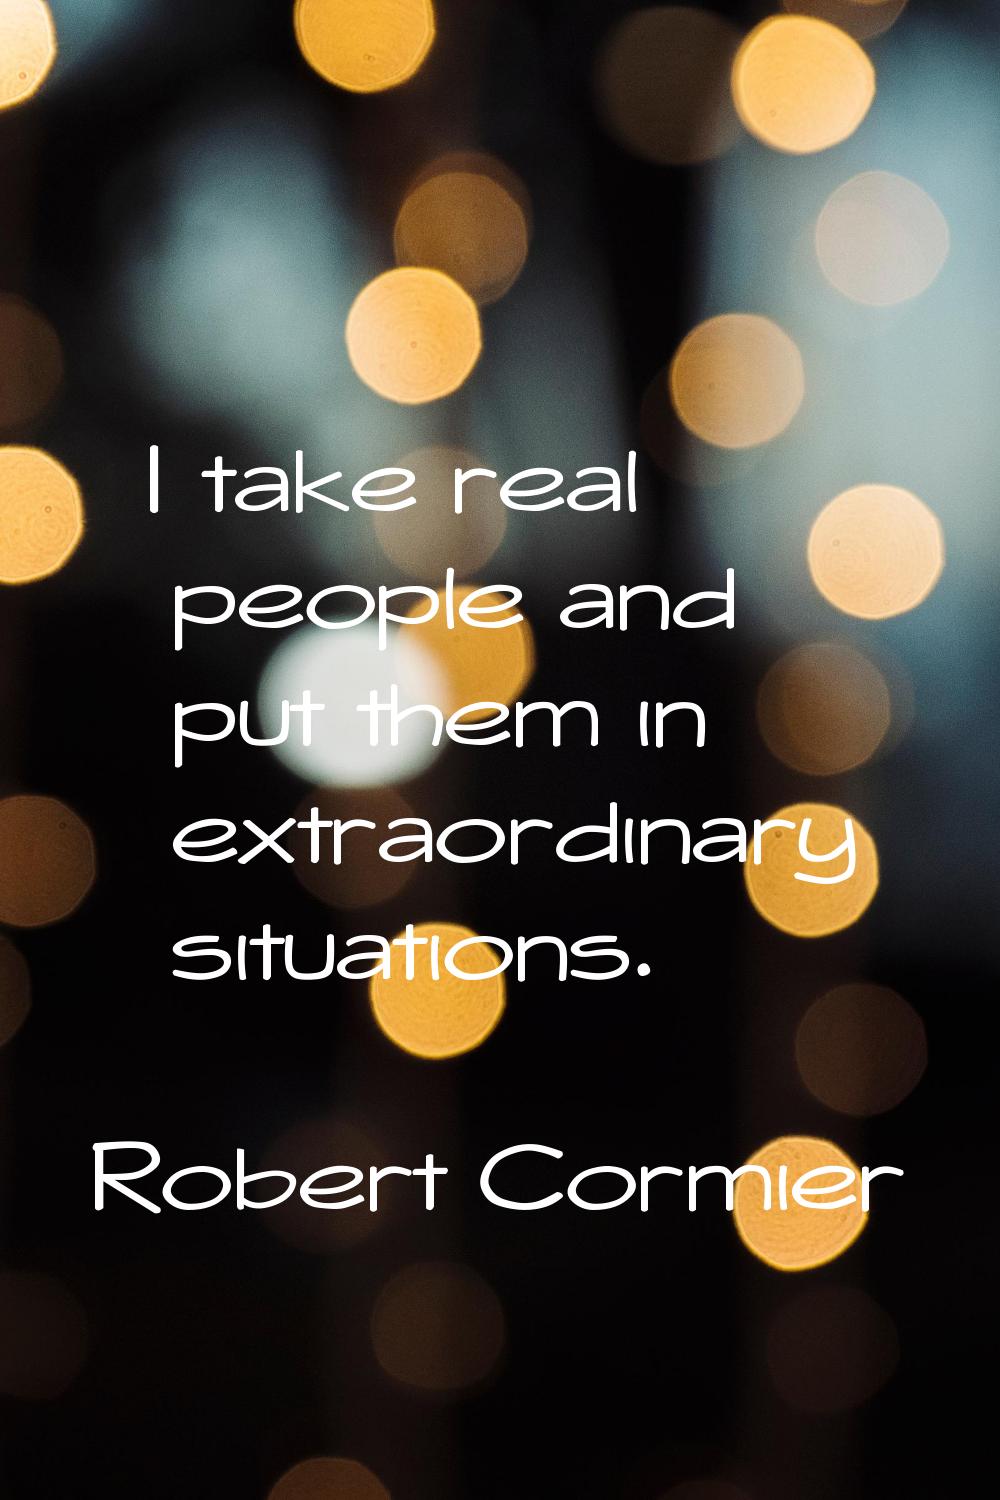 I take real people and put them in extraordinary situations.